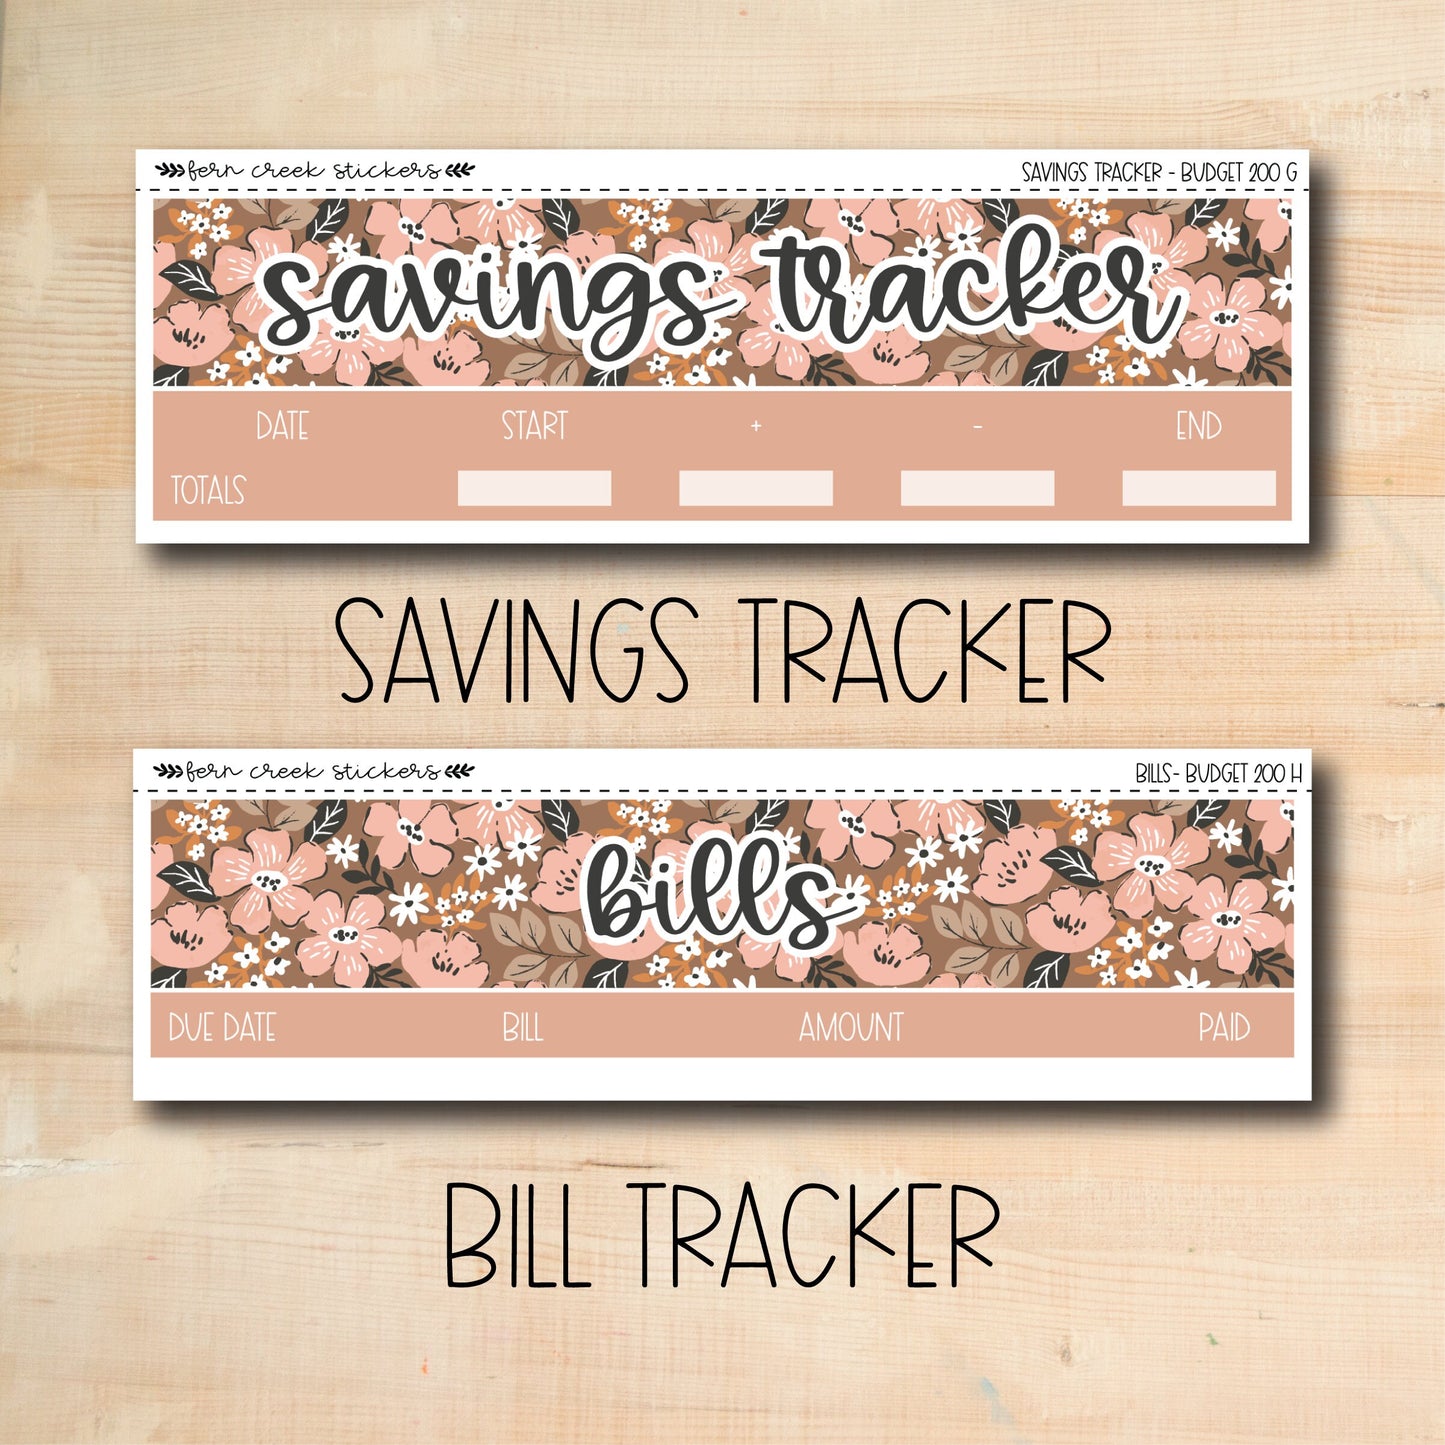 a picture of two savings tracker labels on a wooden surface